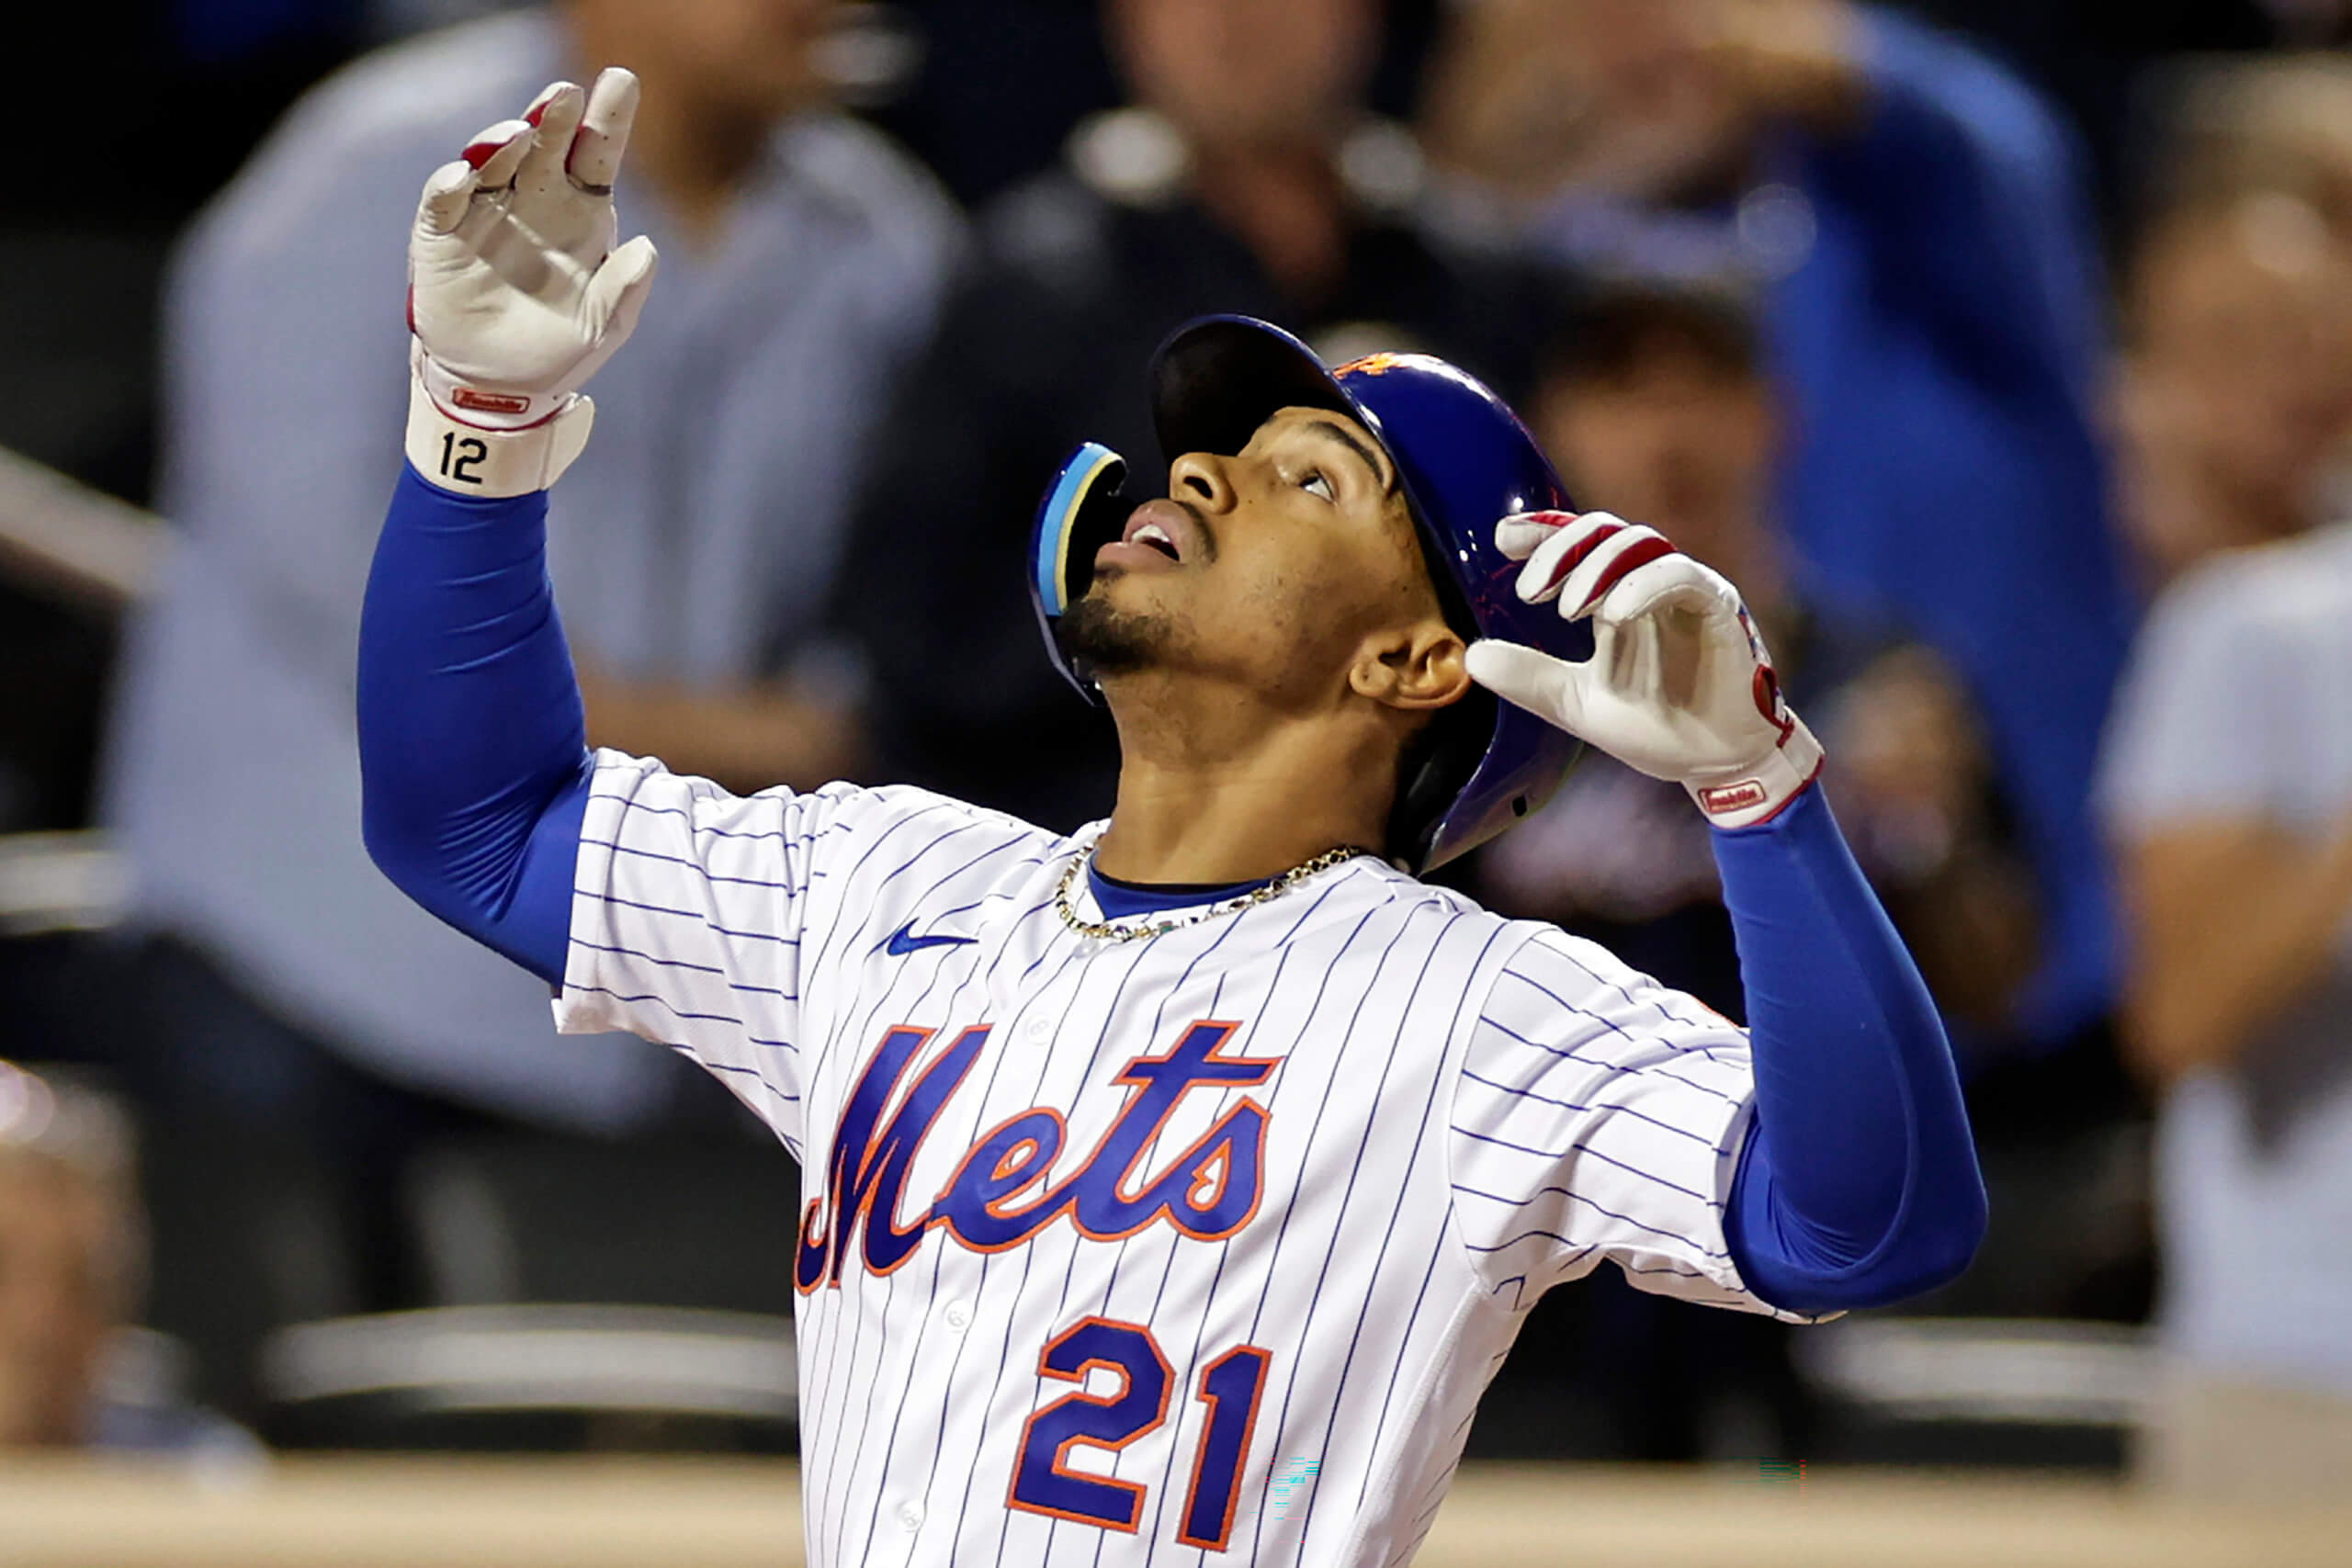 Lindor's hit lifts struggling Mets to much-needed win over